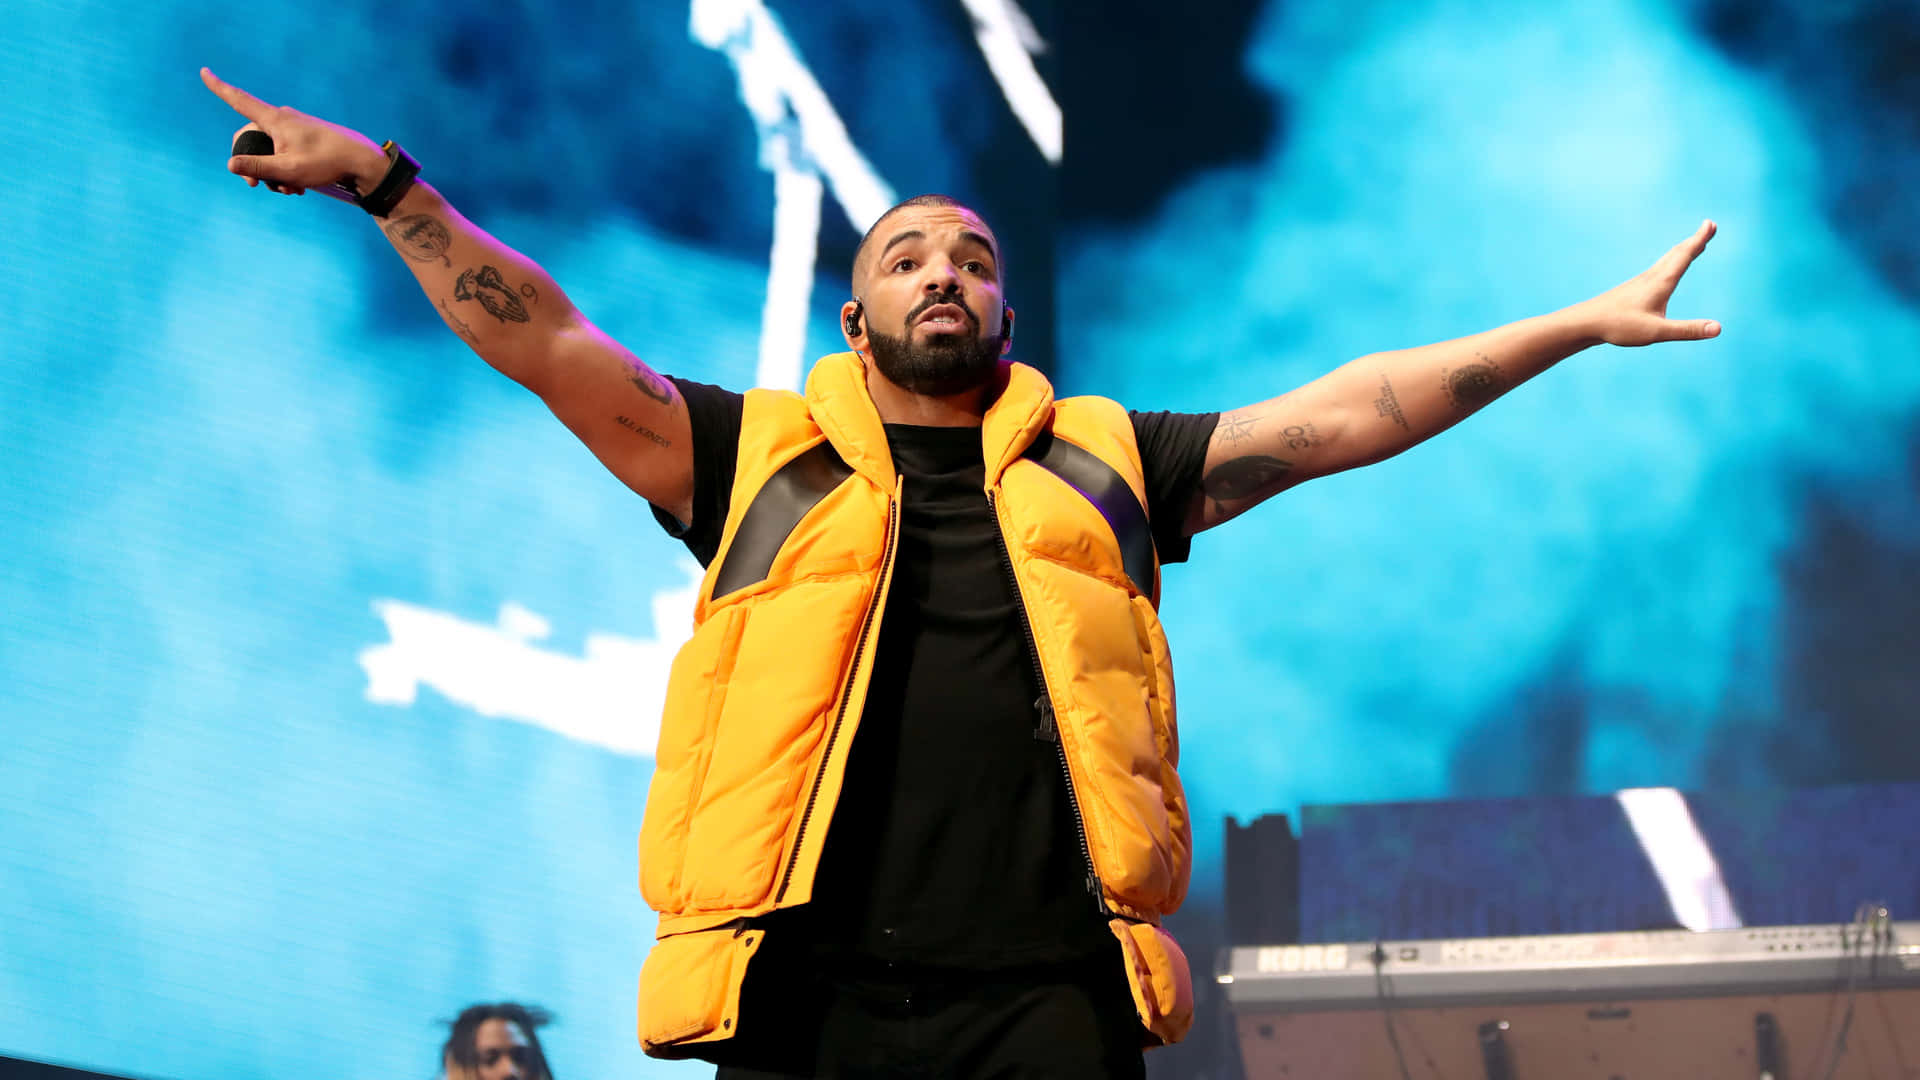 Drake Performs At A Concert With His Arms Outstretched Wallpaper